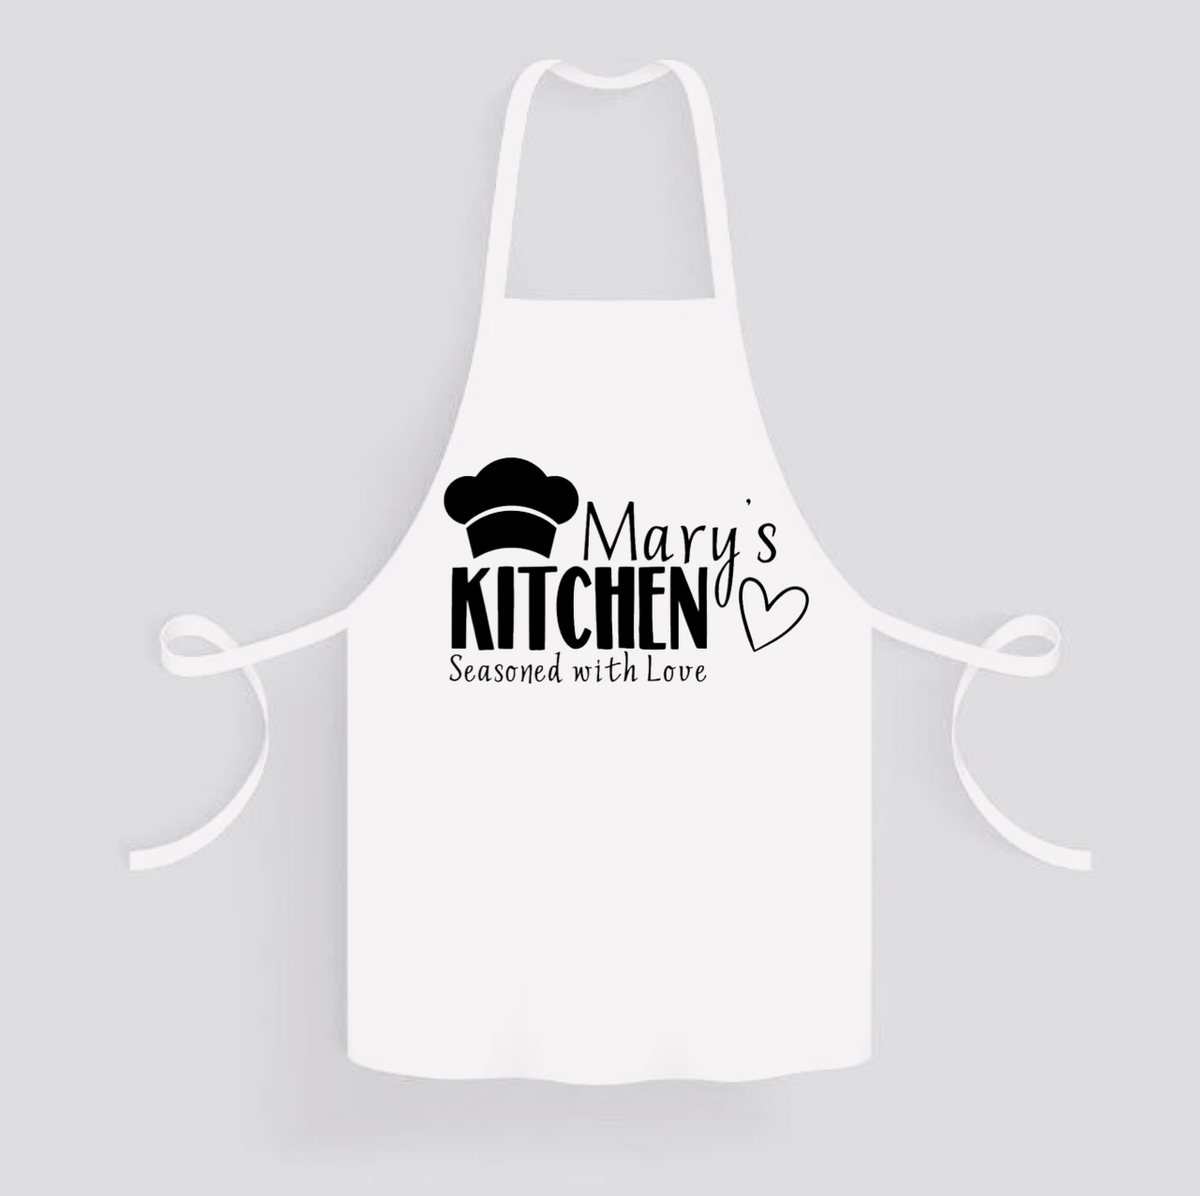 https://cdn.shopify.com/s/files/1/0259/5992/3796/products/maryskitchenseasonedwithlove_1.png?v=1588251004&width=1200